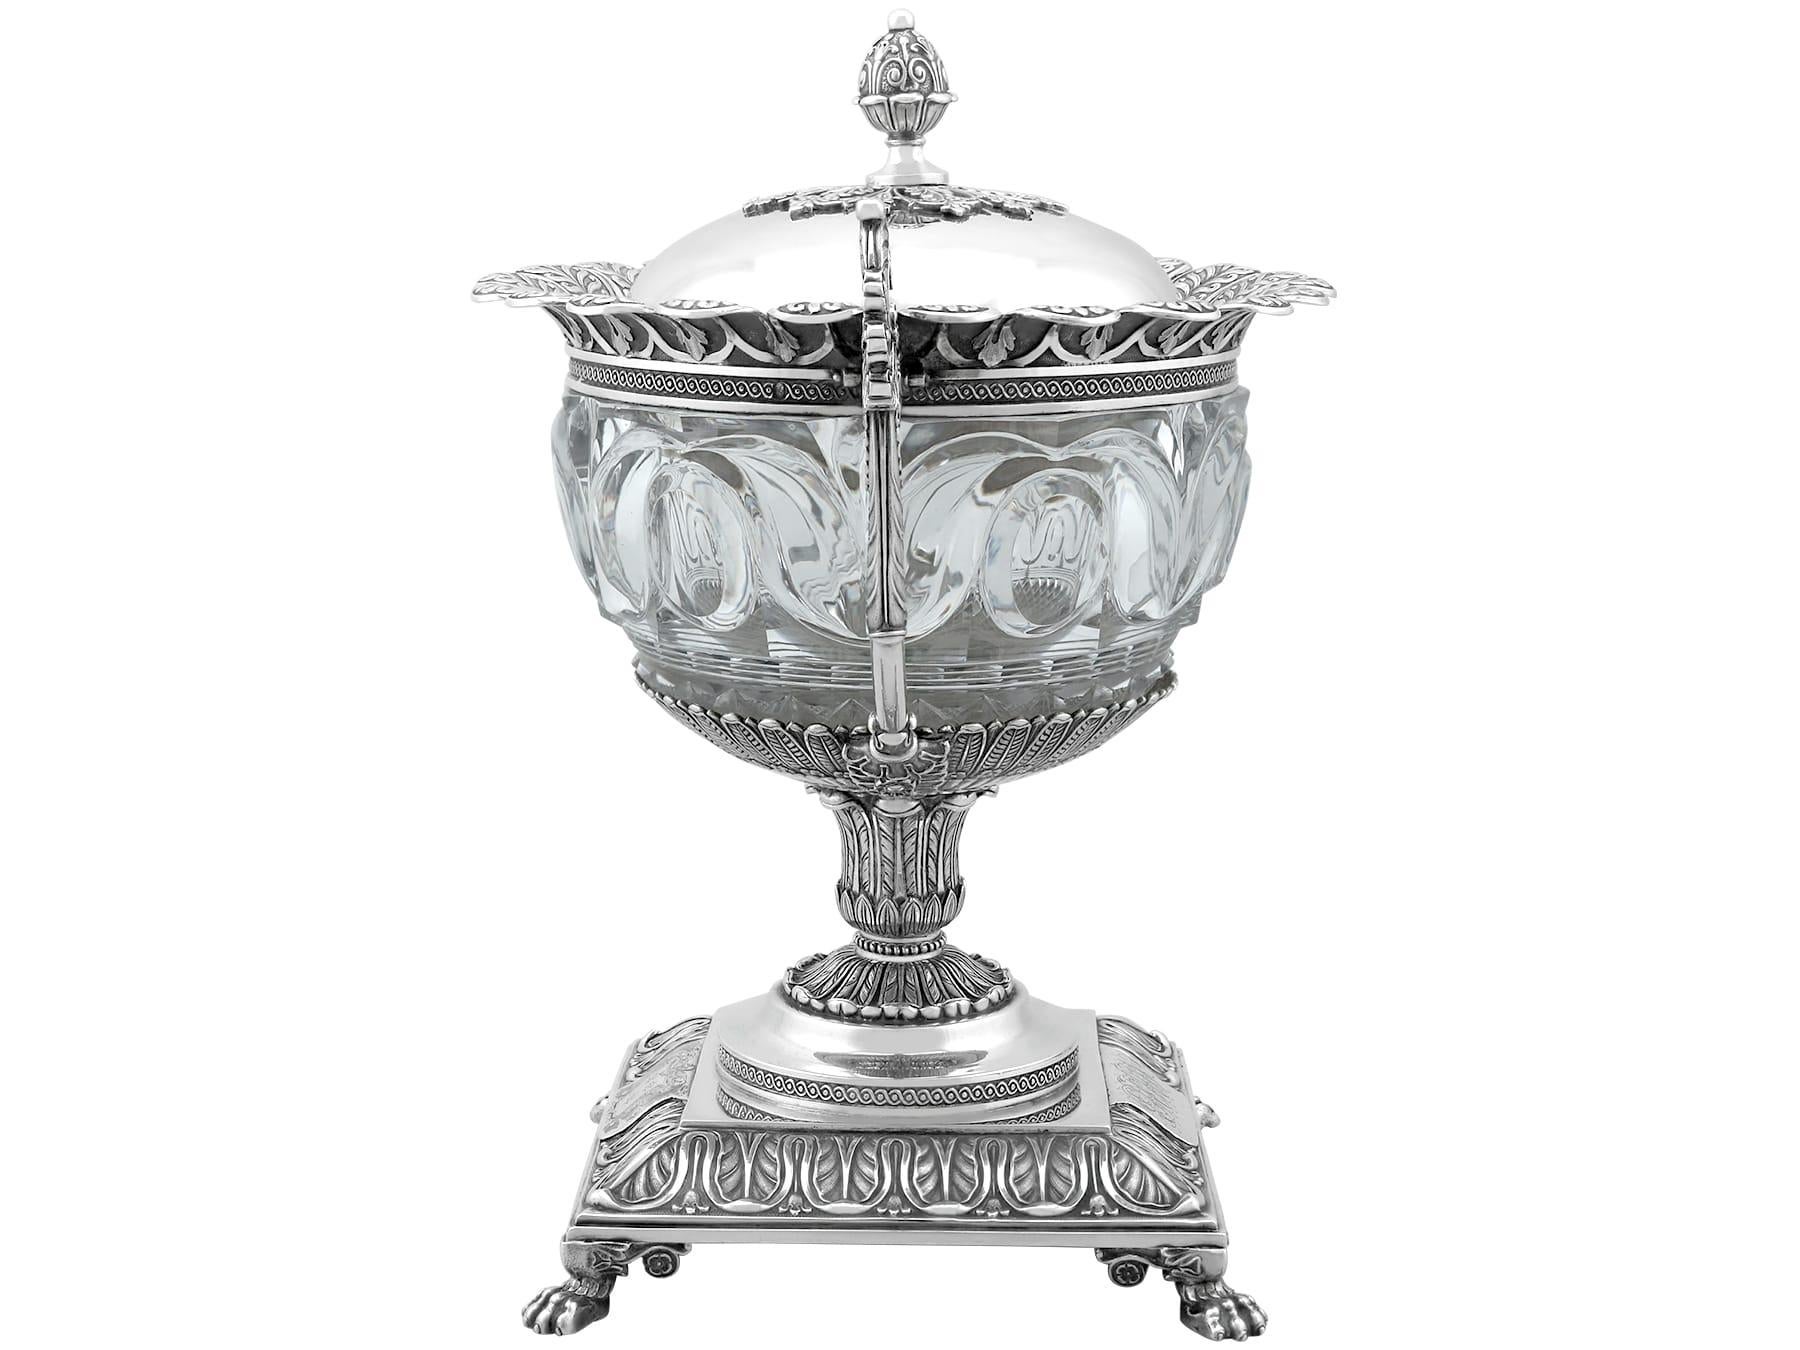 A magnificent, fine and impressive antique French silver and cut glass serving/caviar dish; an addition to our ornamental silverware collection

This magnificent antique French silver and cut glass caviar/serving dish has circular shaped form onto